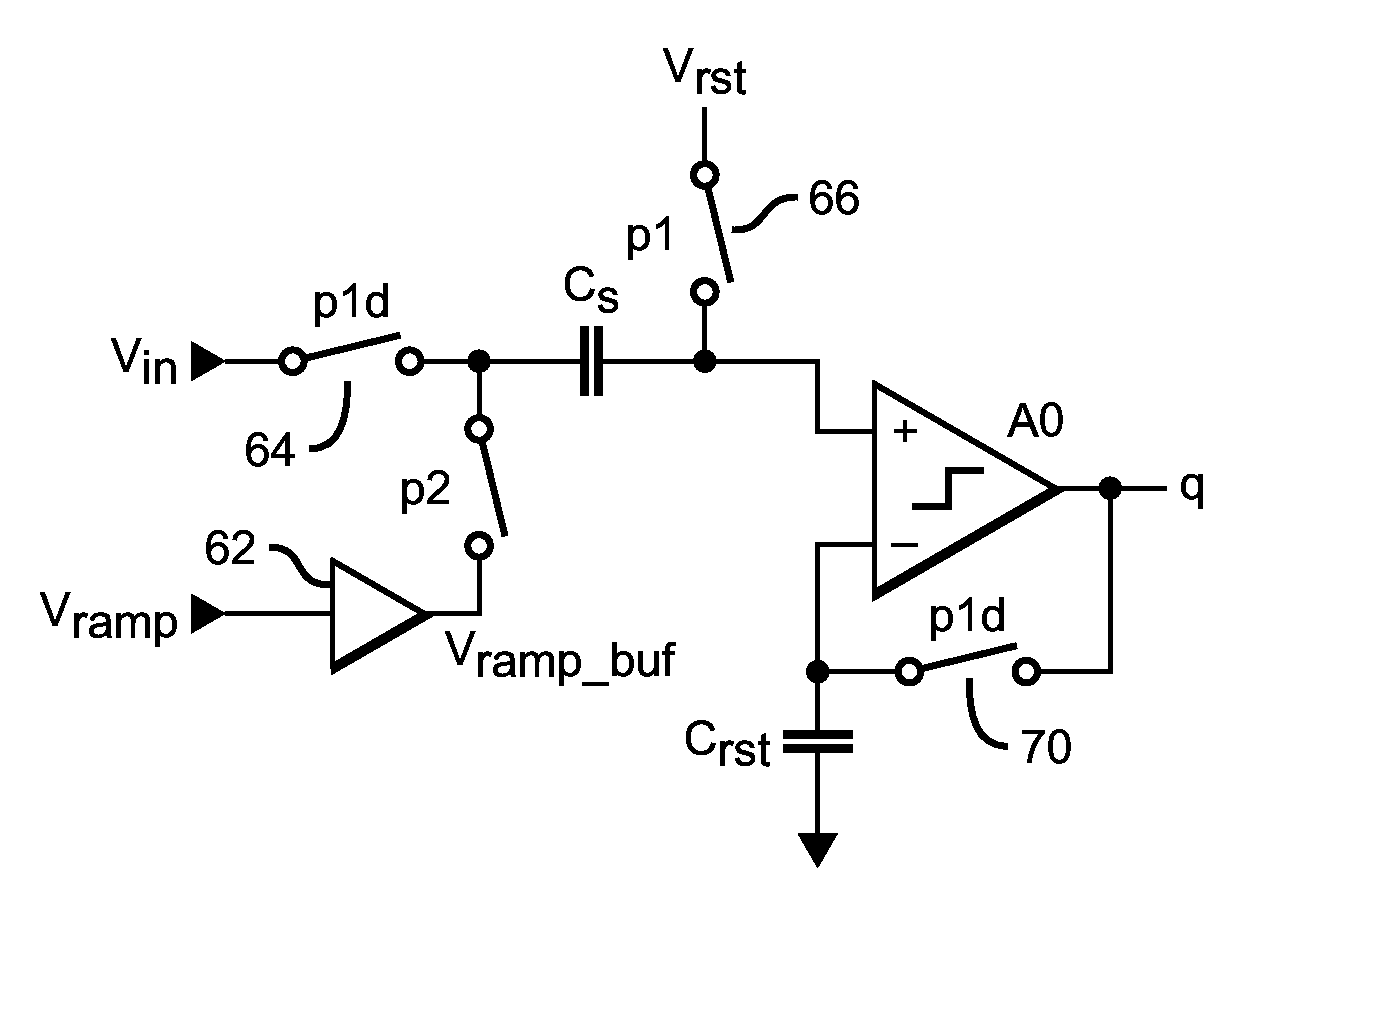 Comparator circuits with local ramp buffering for a column-parallel single-slope ADC